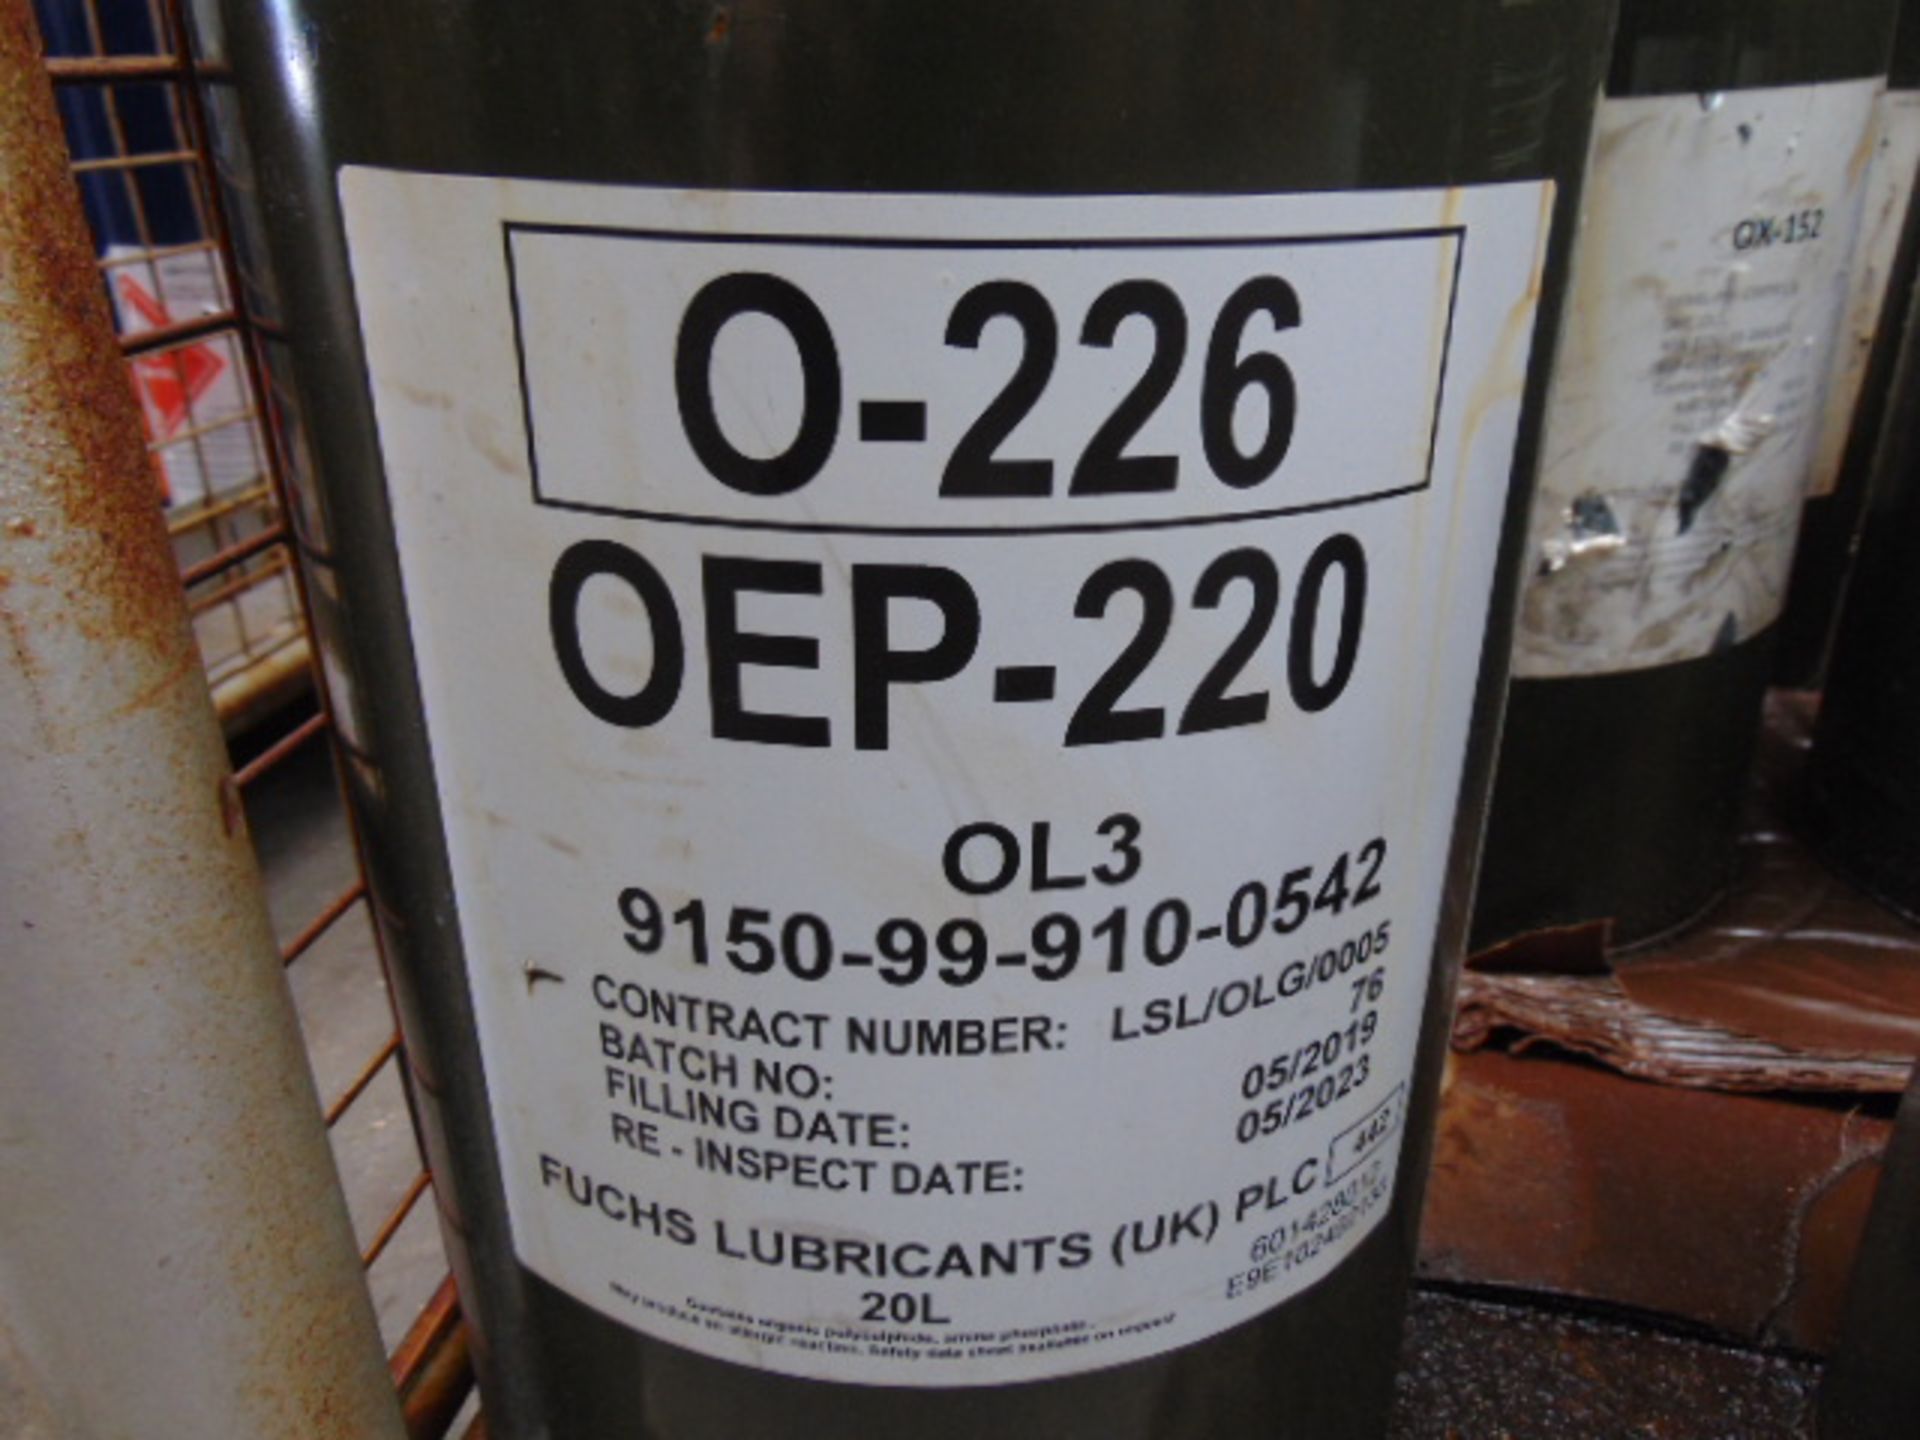 1 x Unissued 25L Drum of OEP 220 Extreme Pressure Gear Oil 80W90 Guage - Image 2 of 3